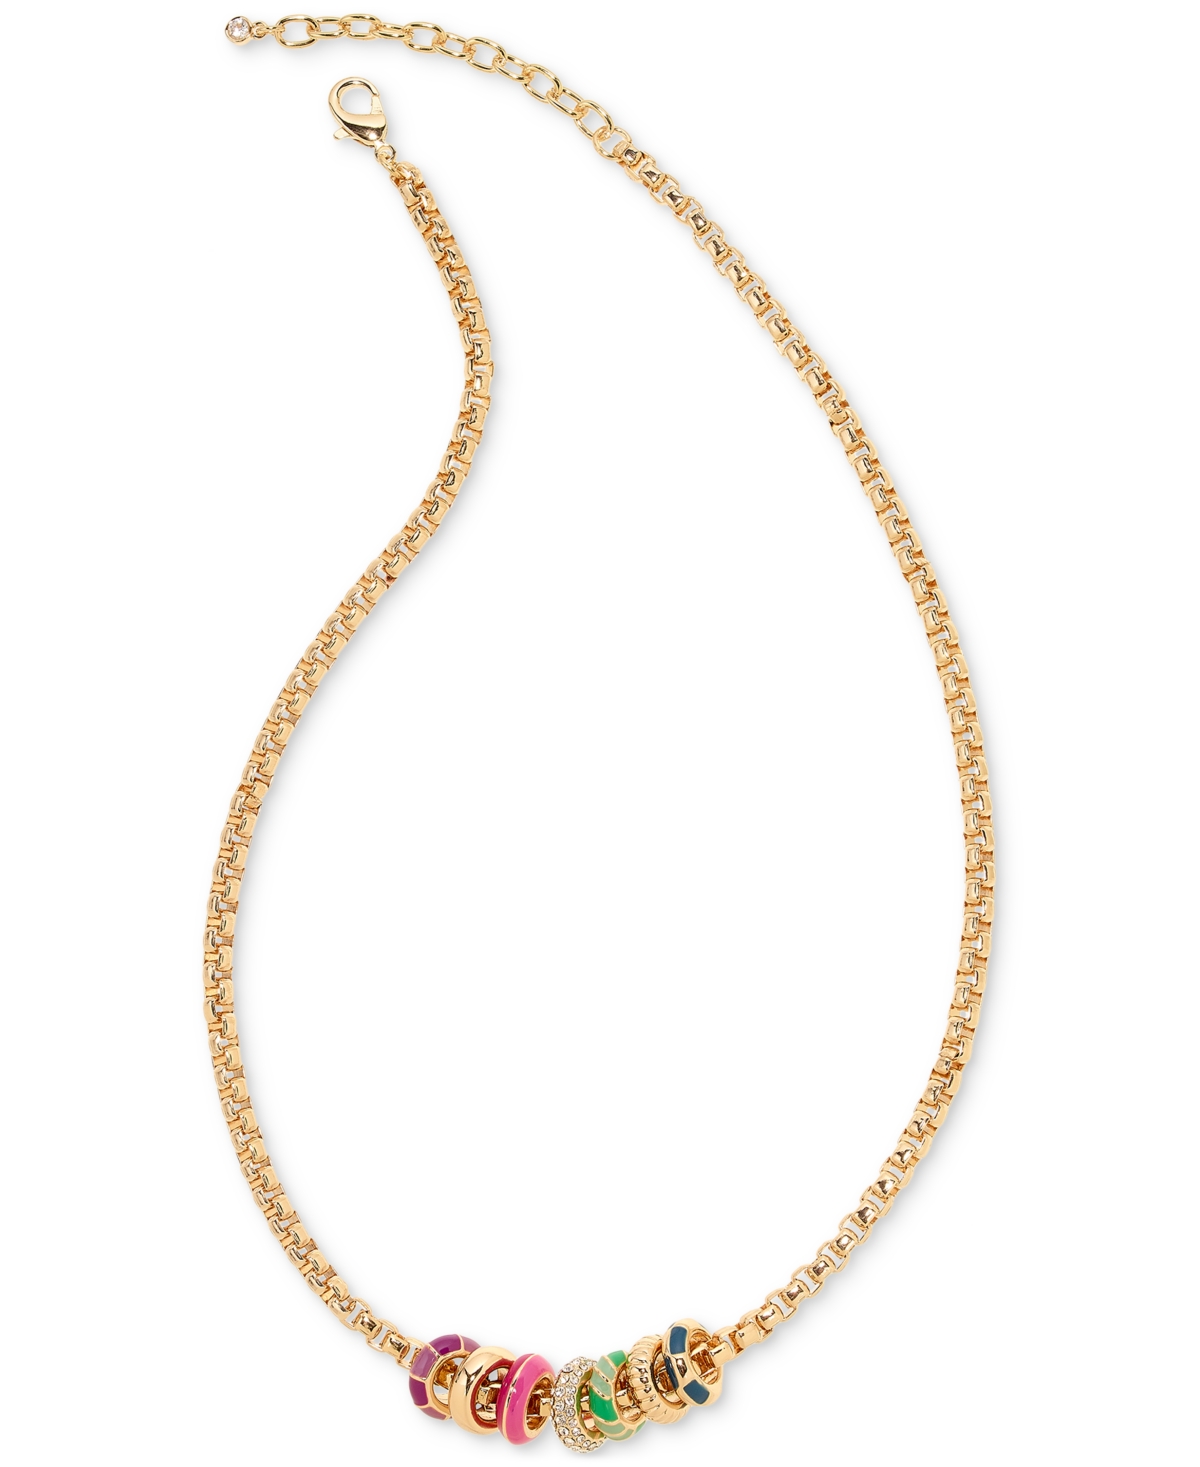 Gold-Tone Crystal & Color Bead Strand Necklace, 18" + 2" extender, Created for Macy's - Brown